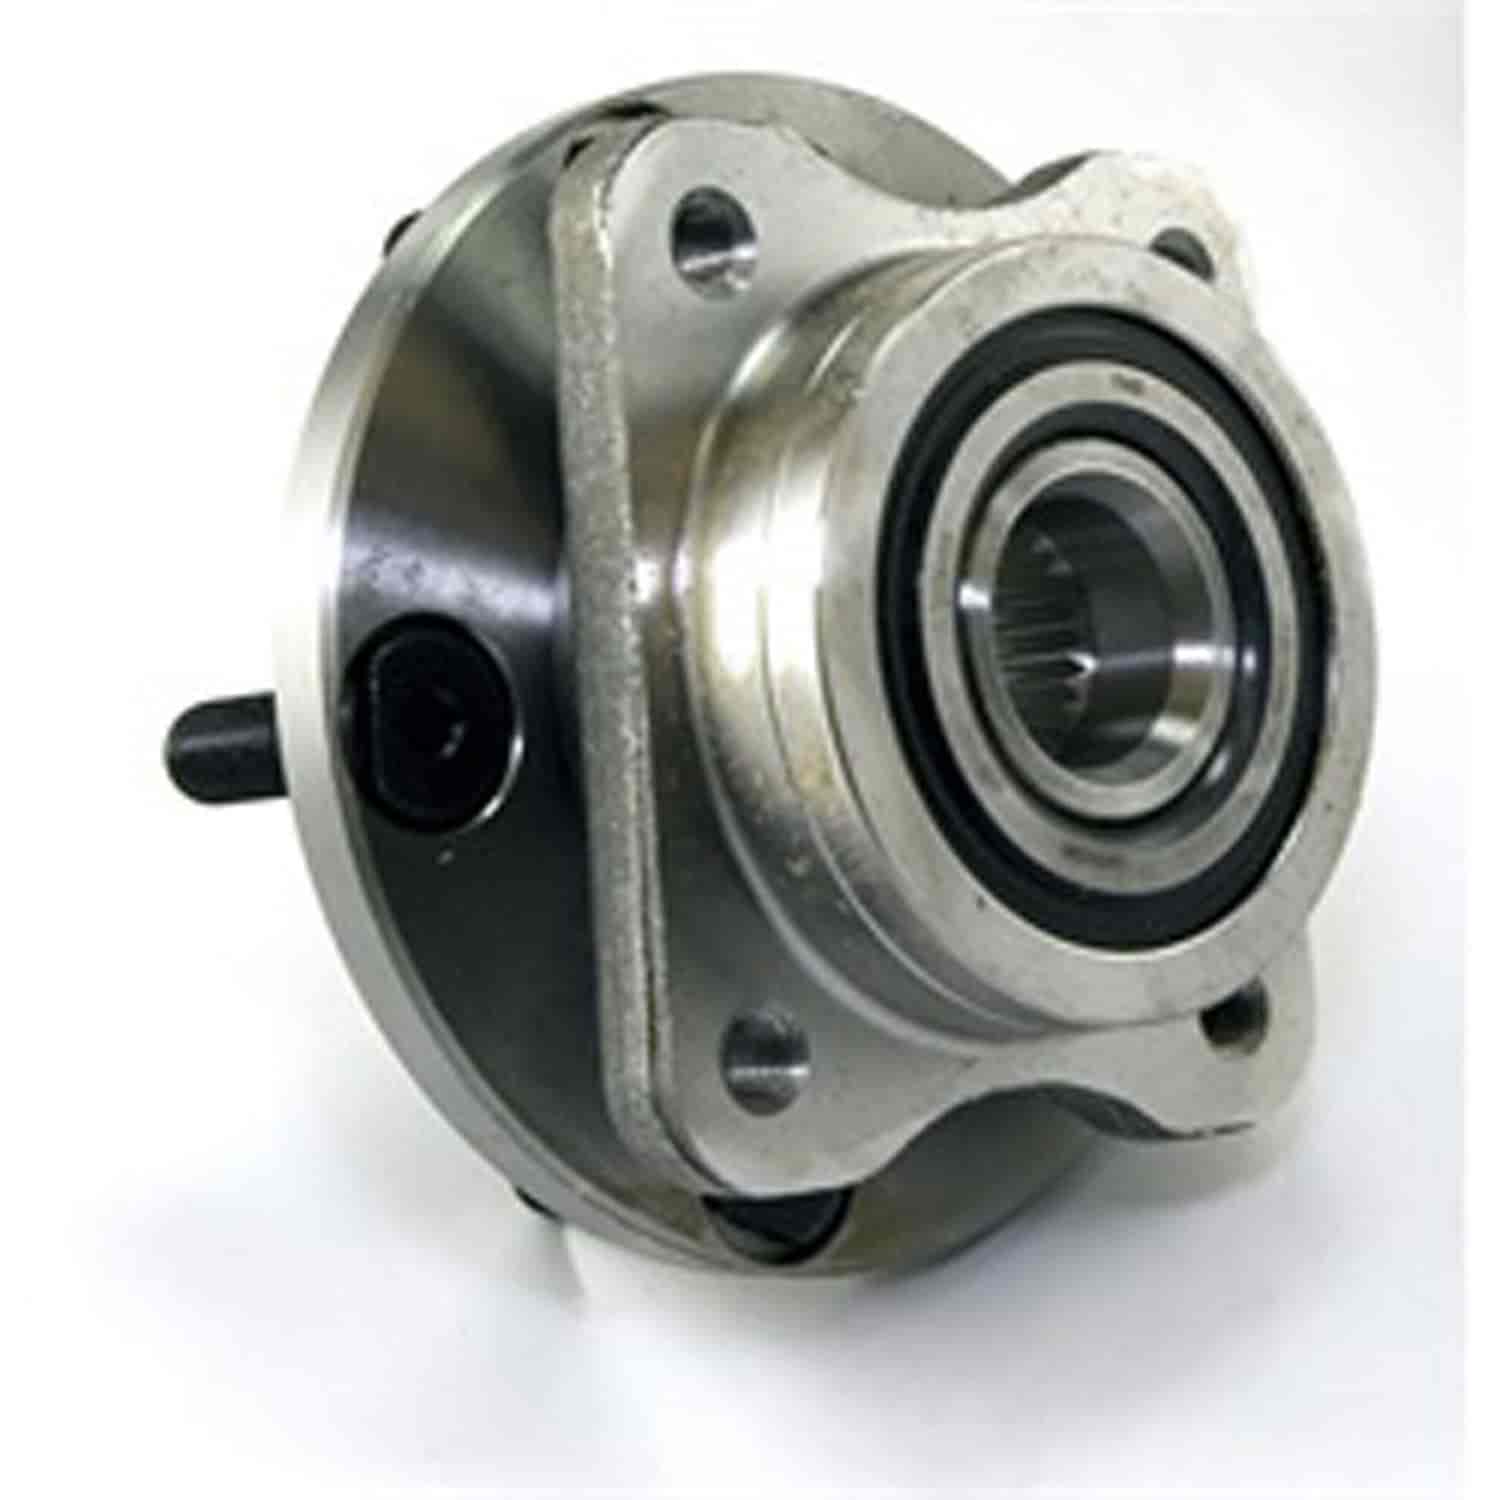 This front axle hub assembly from Omix-ADA fits 96-02 Chrysler minivans with NS RS and GS bodies.